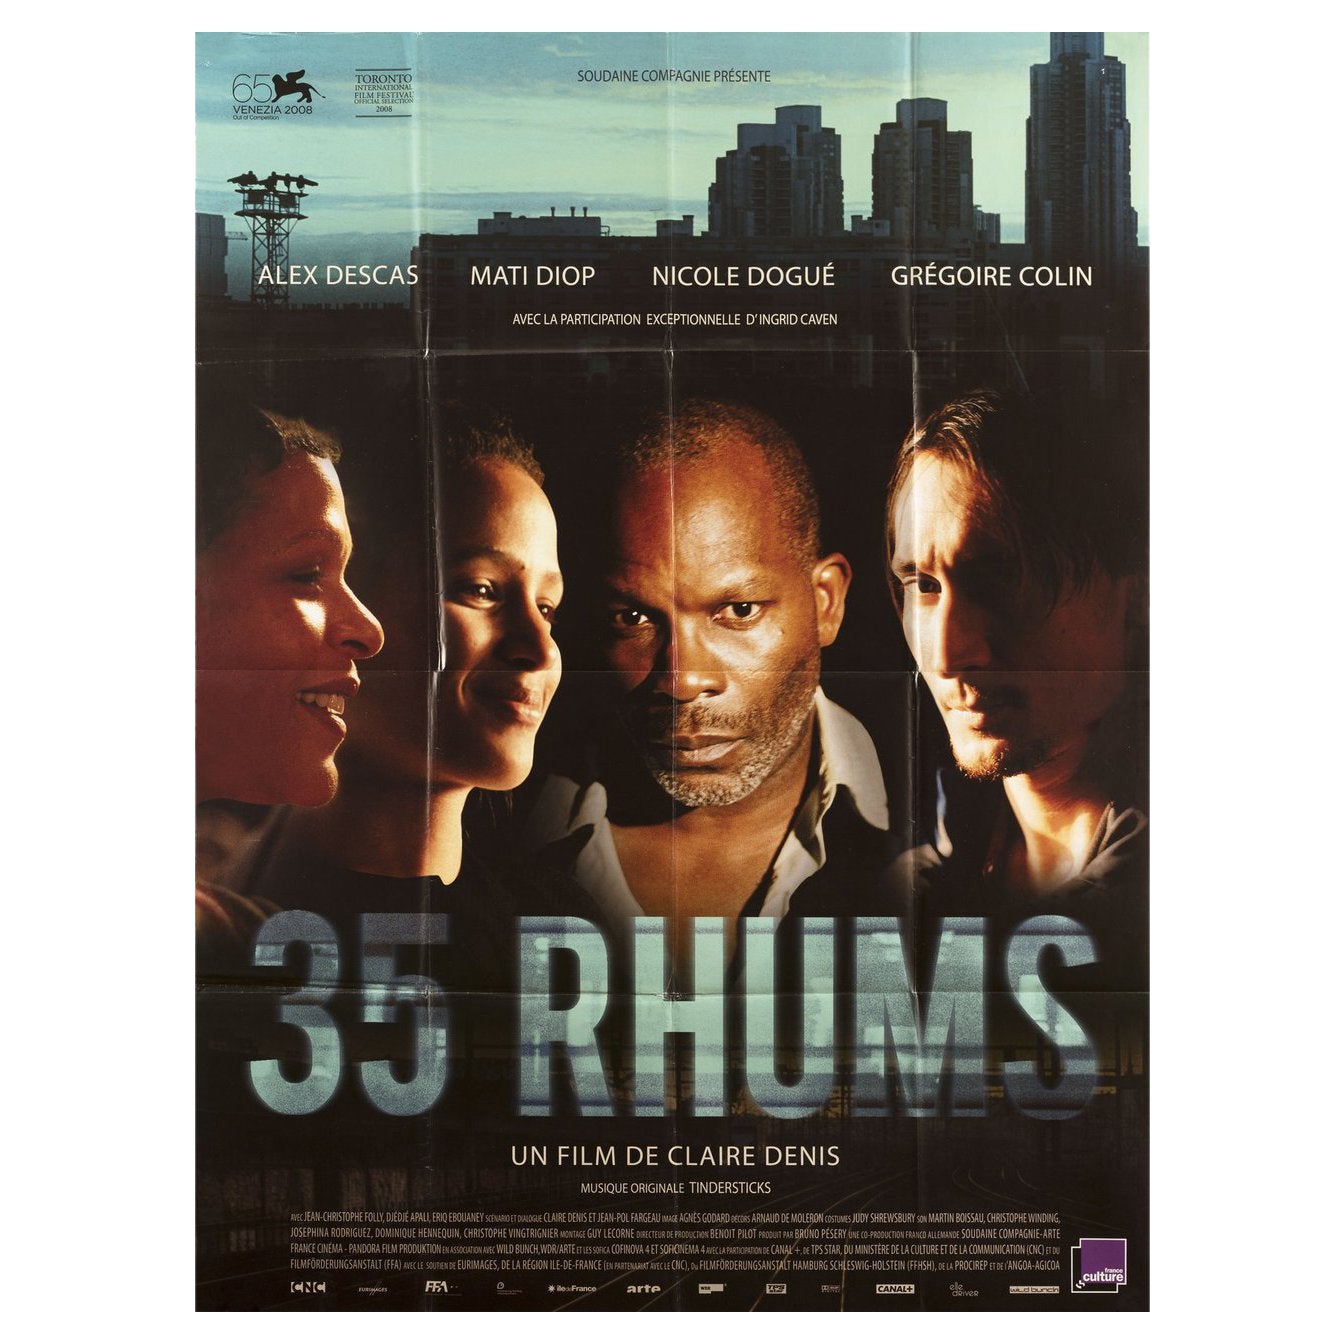 35 Shots of Rum 2008 French Grande Film Poster